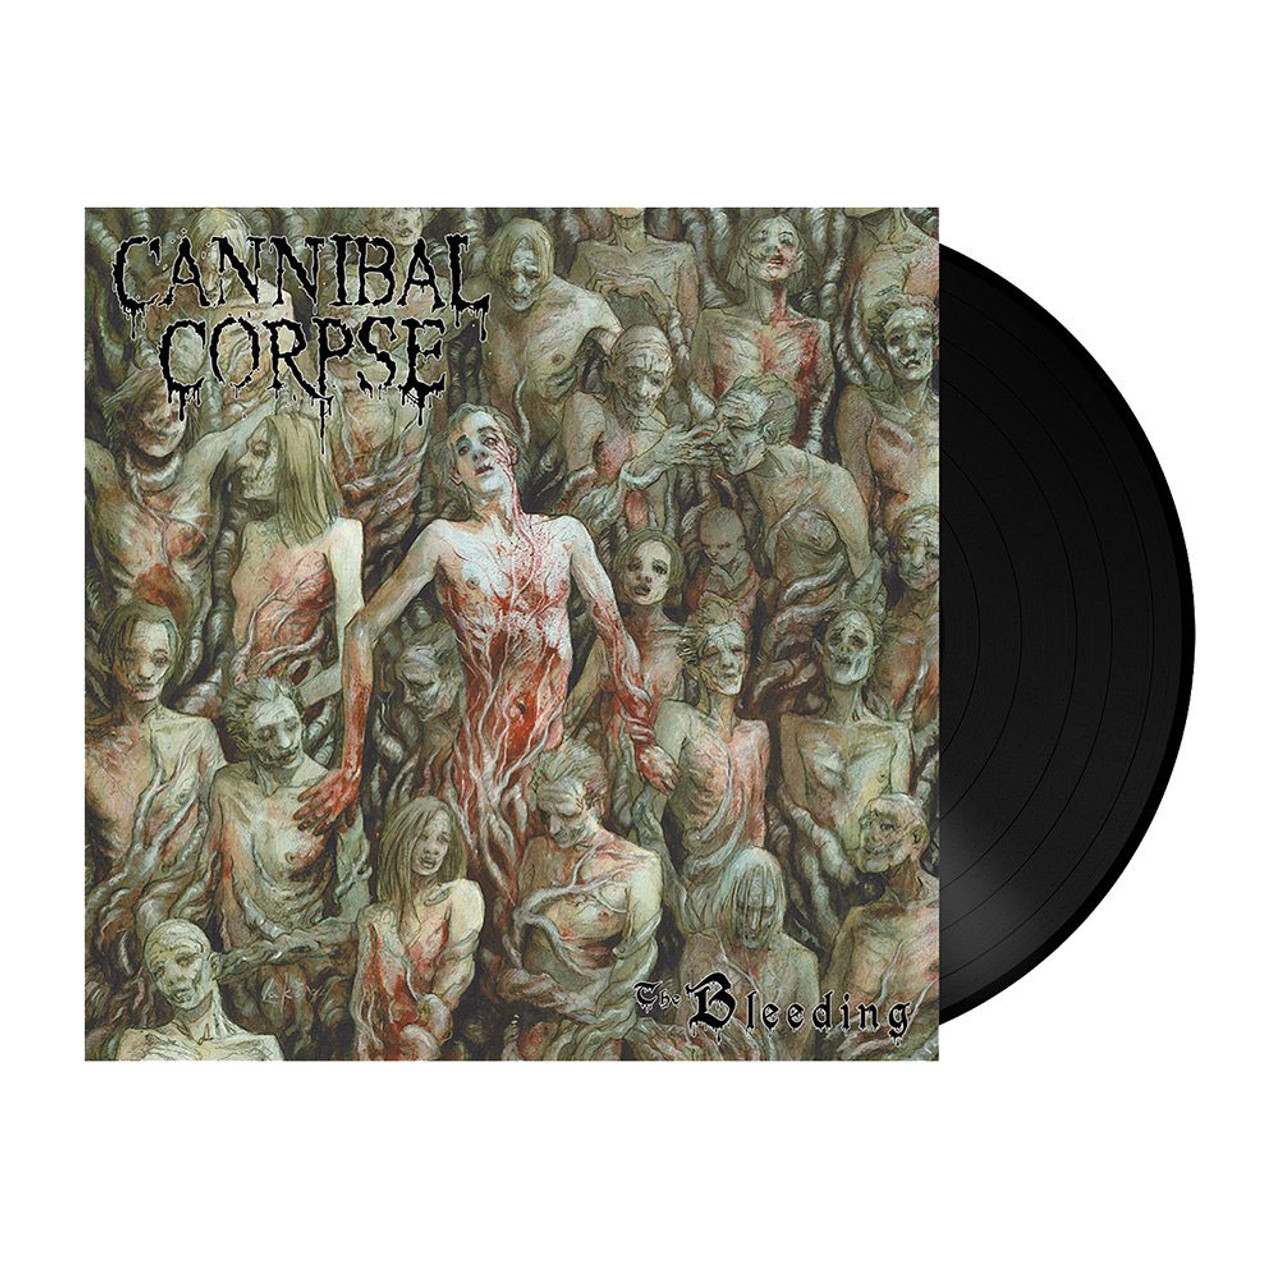 Cannibal Corpse 'The Bleeding' LP Limited Edition 180g Black Vinyl + Giant Poster